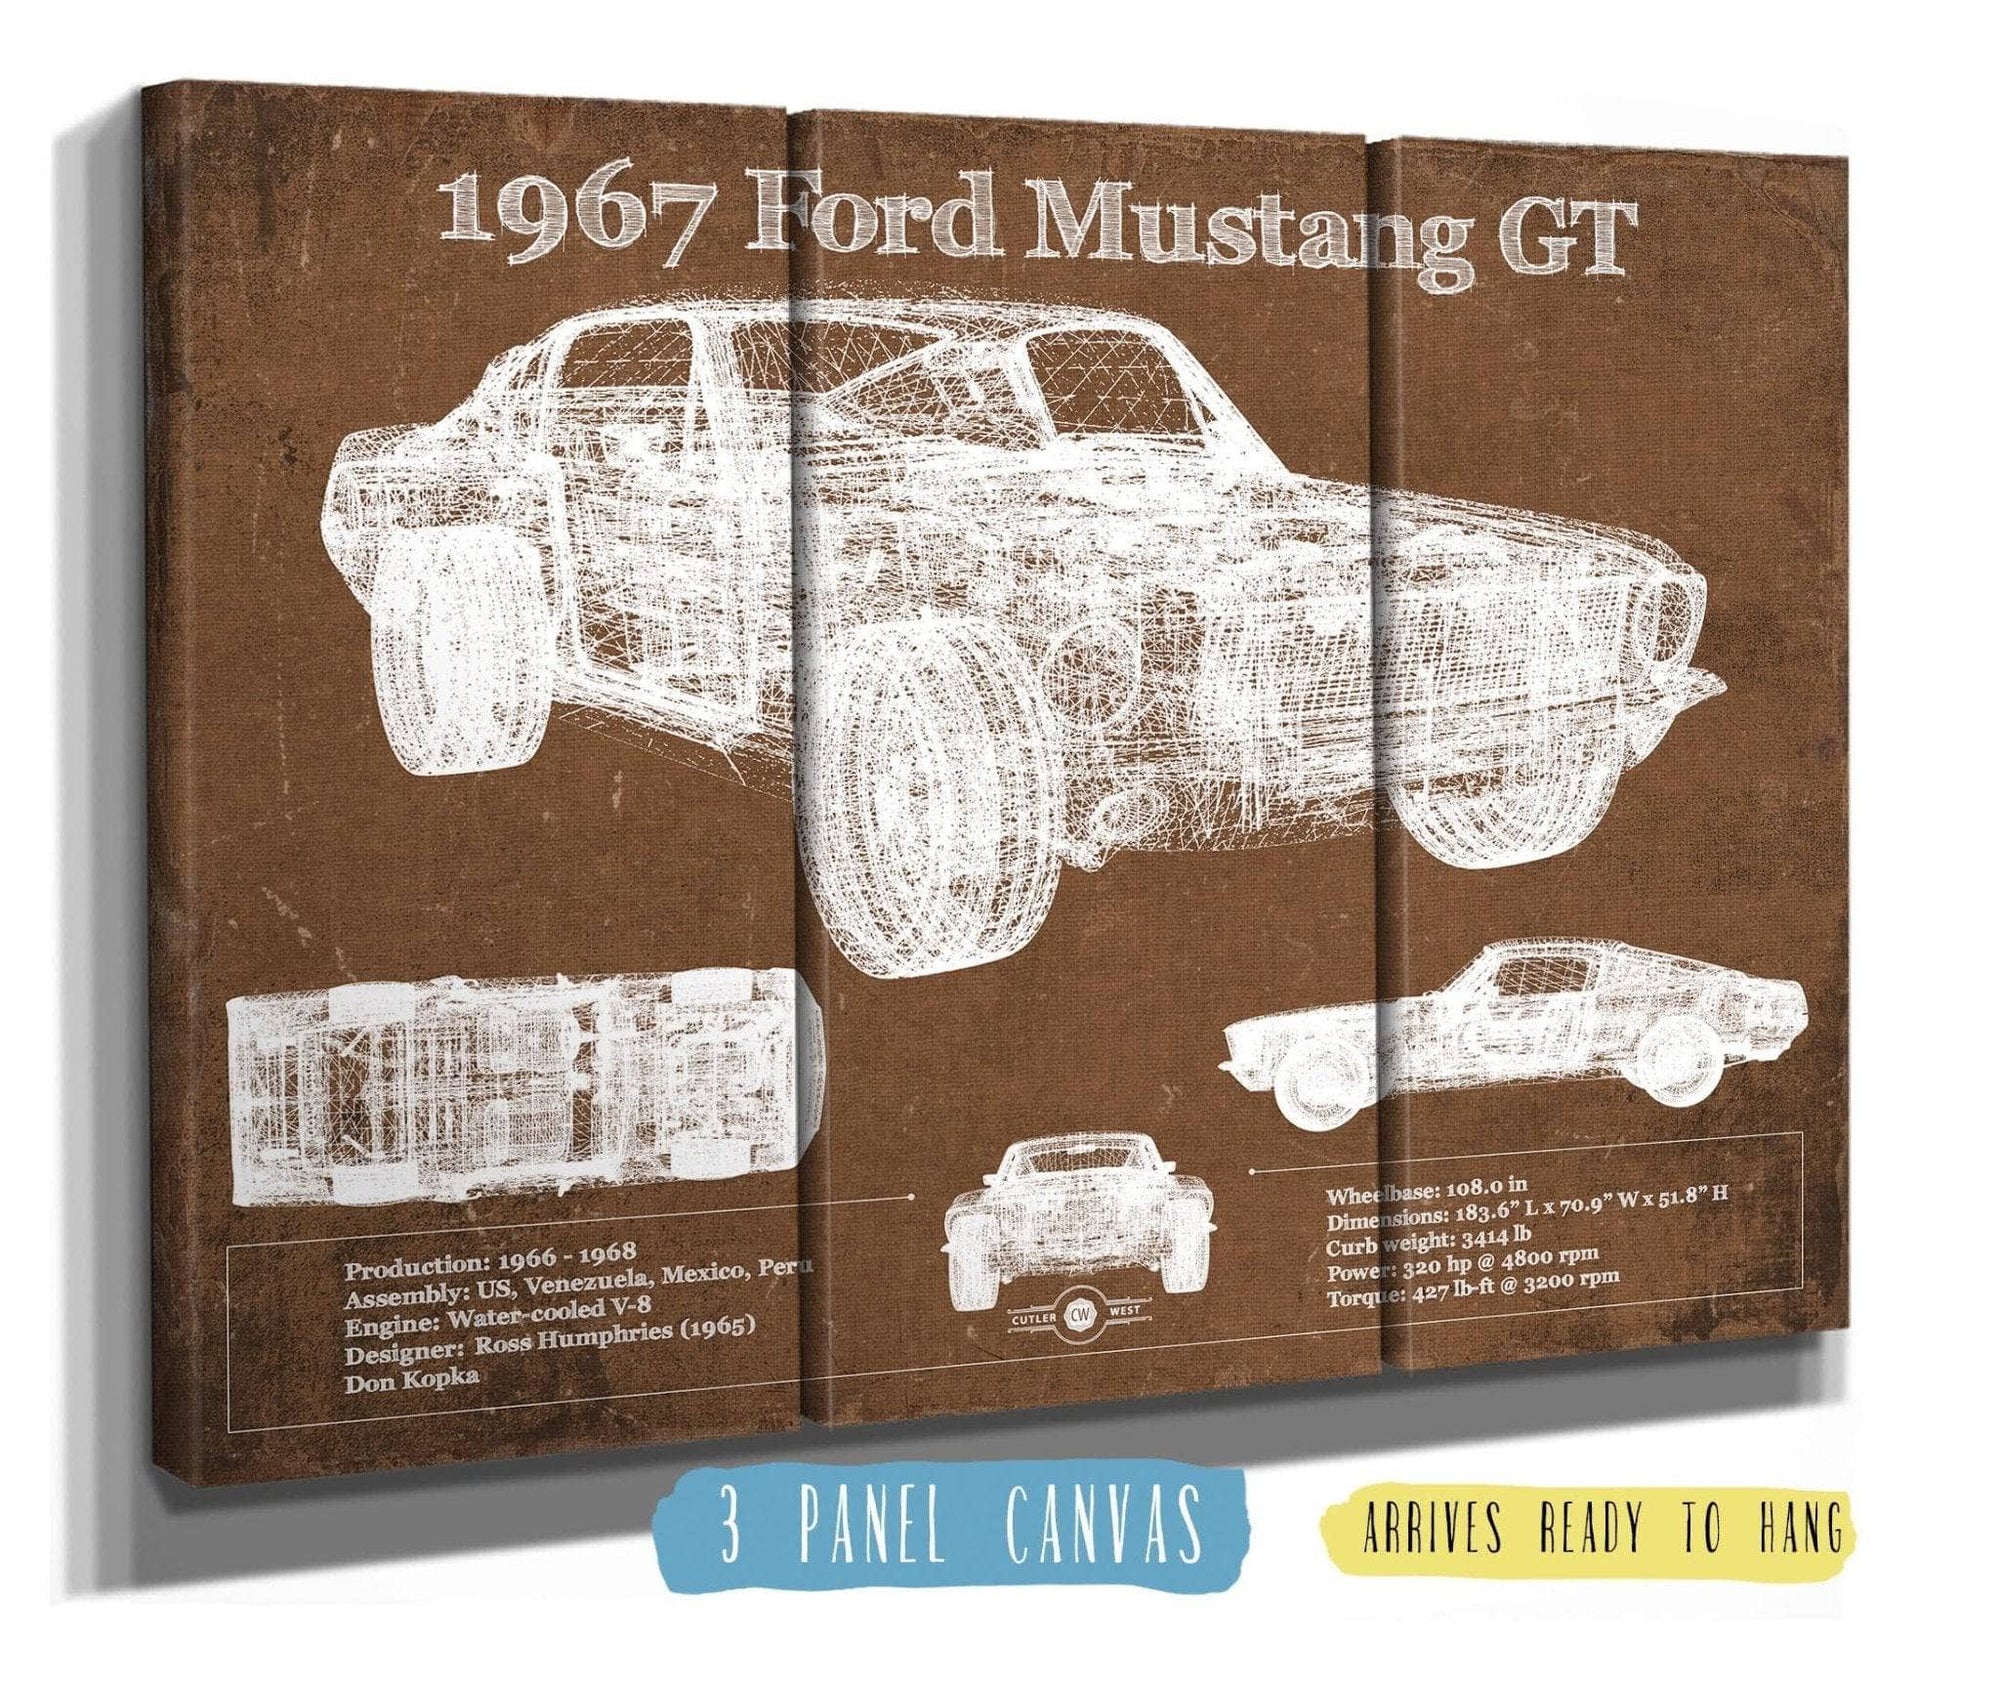 Cutler West Ford Collection 48" x 32" / 3 Panel Canvas Wrap 1967 Ford Mustang GT Blueprint Vintage Auto Print 933350035_34136